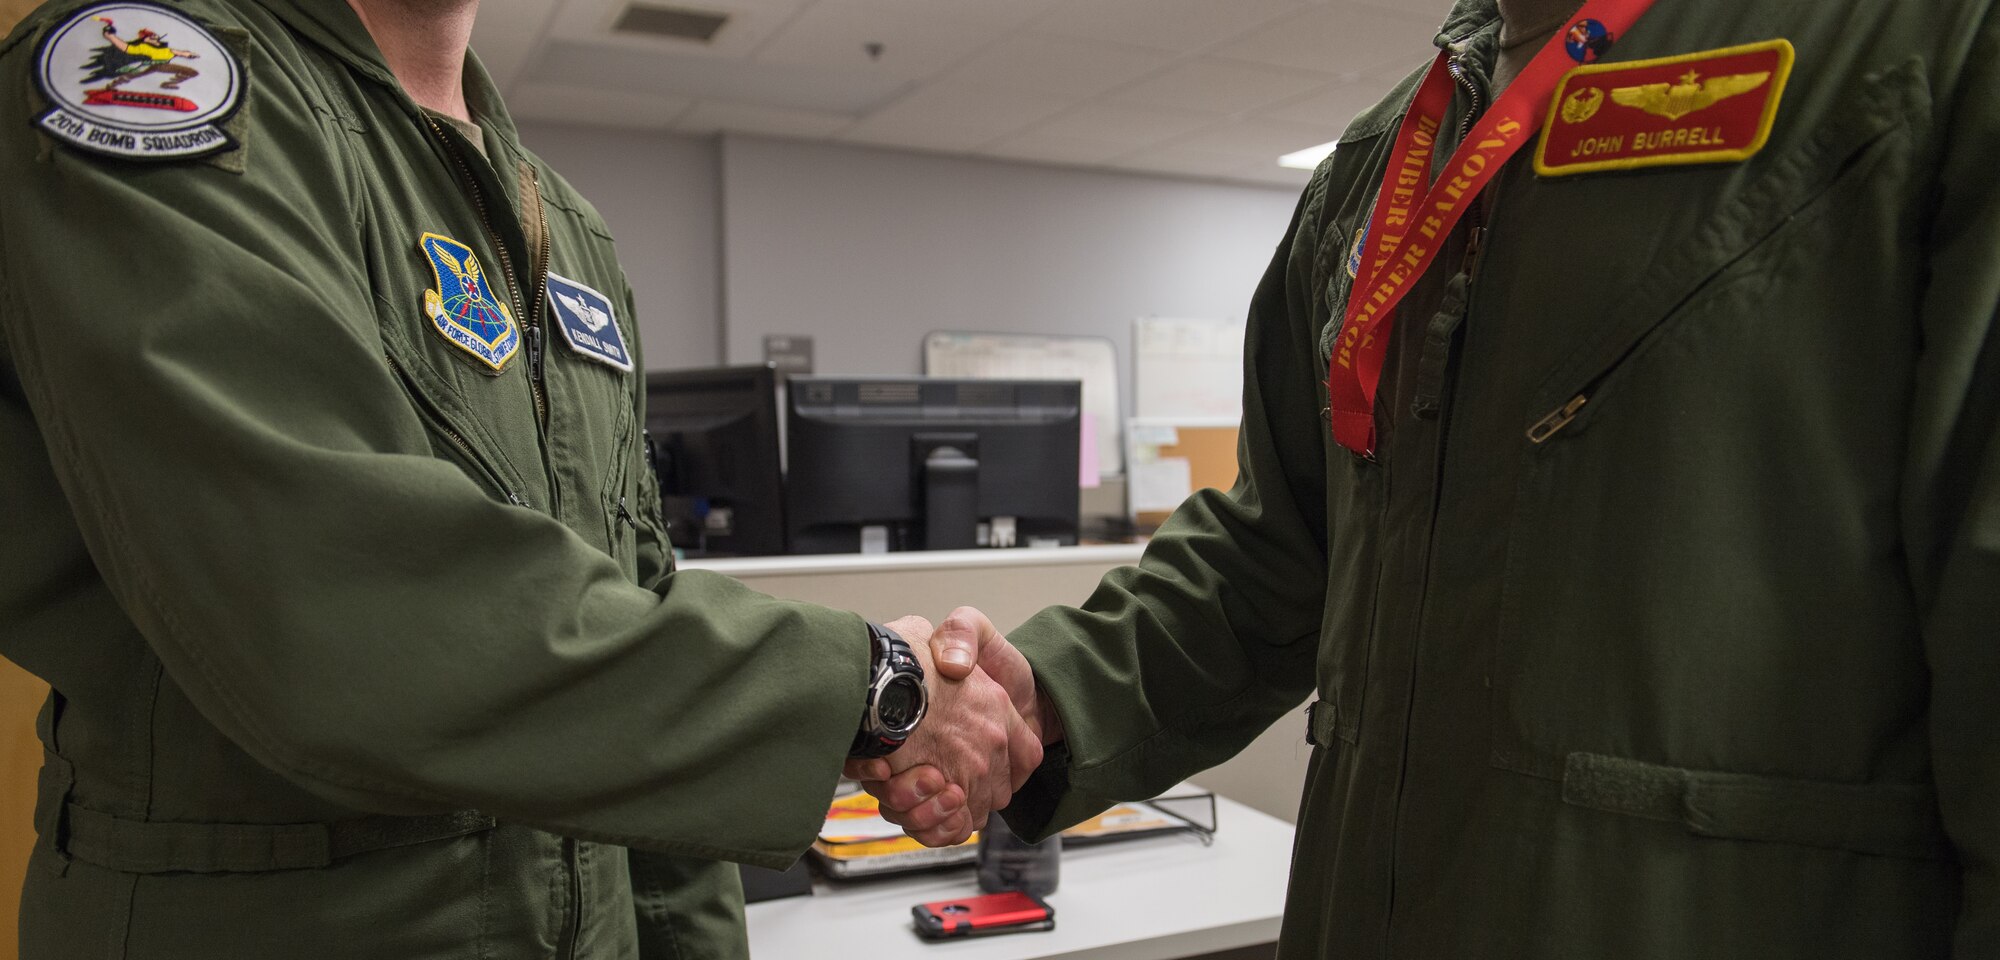 Capt. Kendall Smith (left), 20th Bomb Squadron assistant director of operations, and Lt. Col. John Burrell (right), 23rd Bomb Squadron commander, shake hands after training together at Barksdale Air Force Base, La., Nov. 21, 2019.